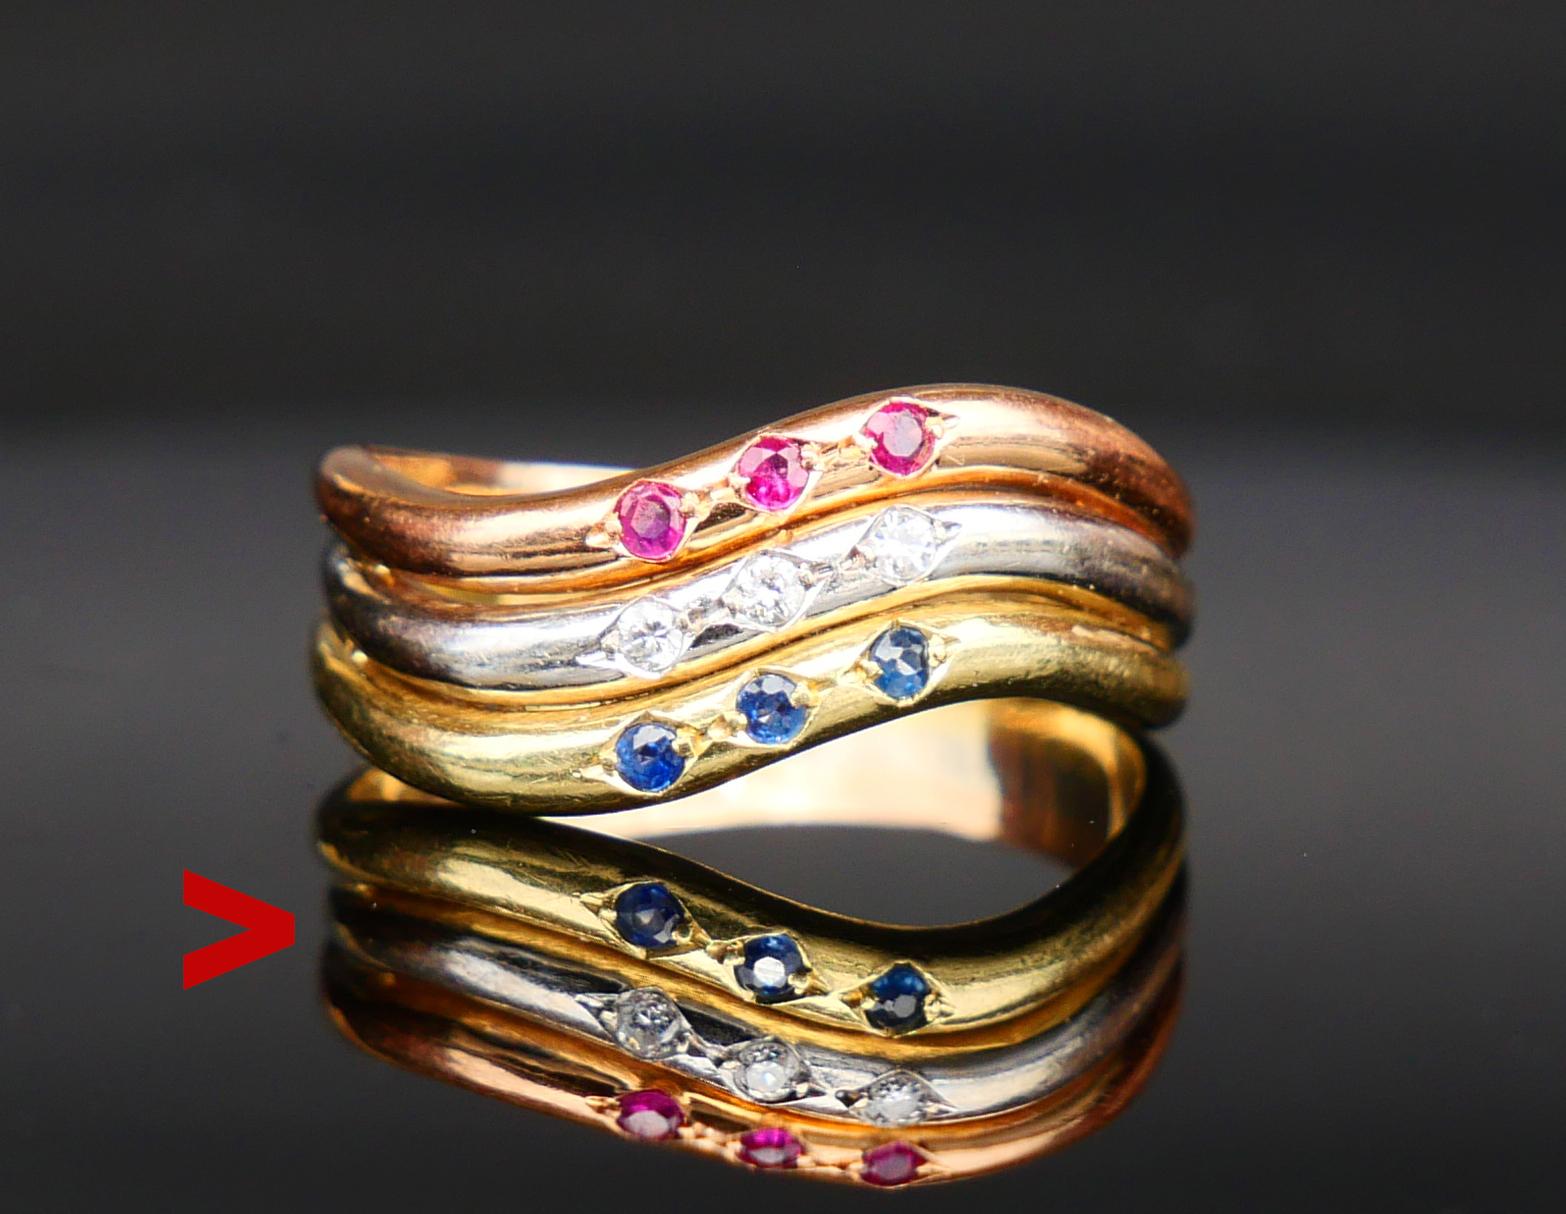 Ring of unusual design with three twisted bands of solid 18K Rose, White and Yellow Gold joined together decorated with Rubies ,Sapphires and Diamonds . European, ca 1950s -1960s .

All stones of old European diamond cut Ø 1.5 mm /0.015ct each, ca.